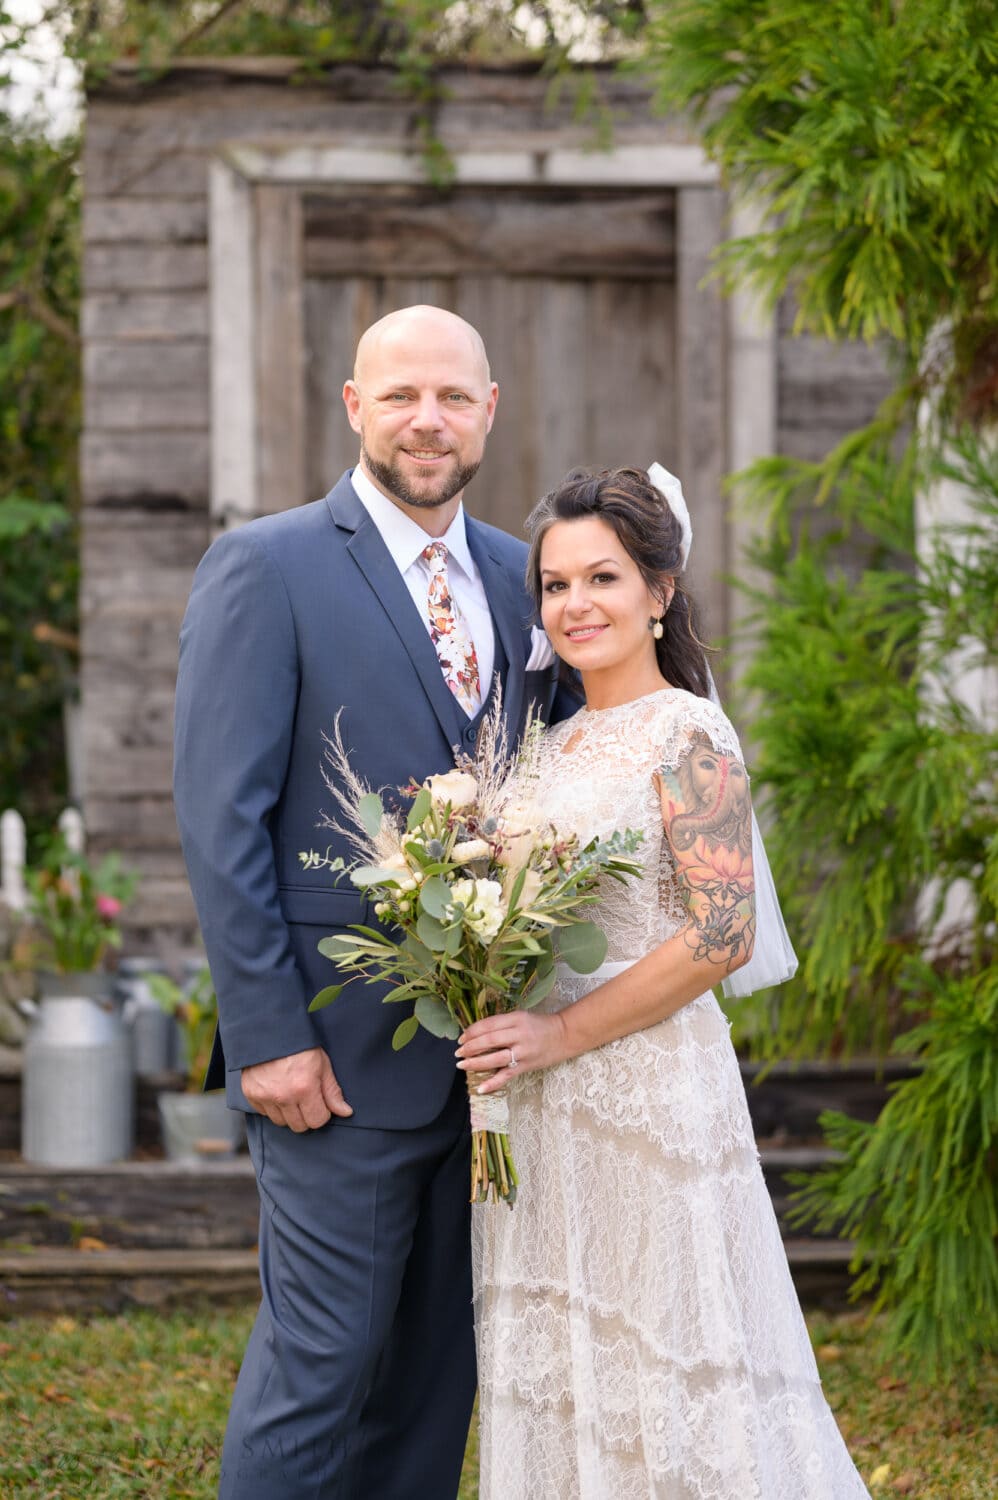 Portraits of the bride and groom in front of the old door - The Cooper House